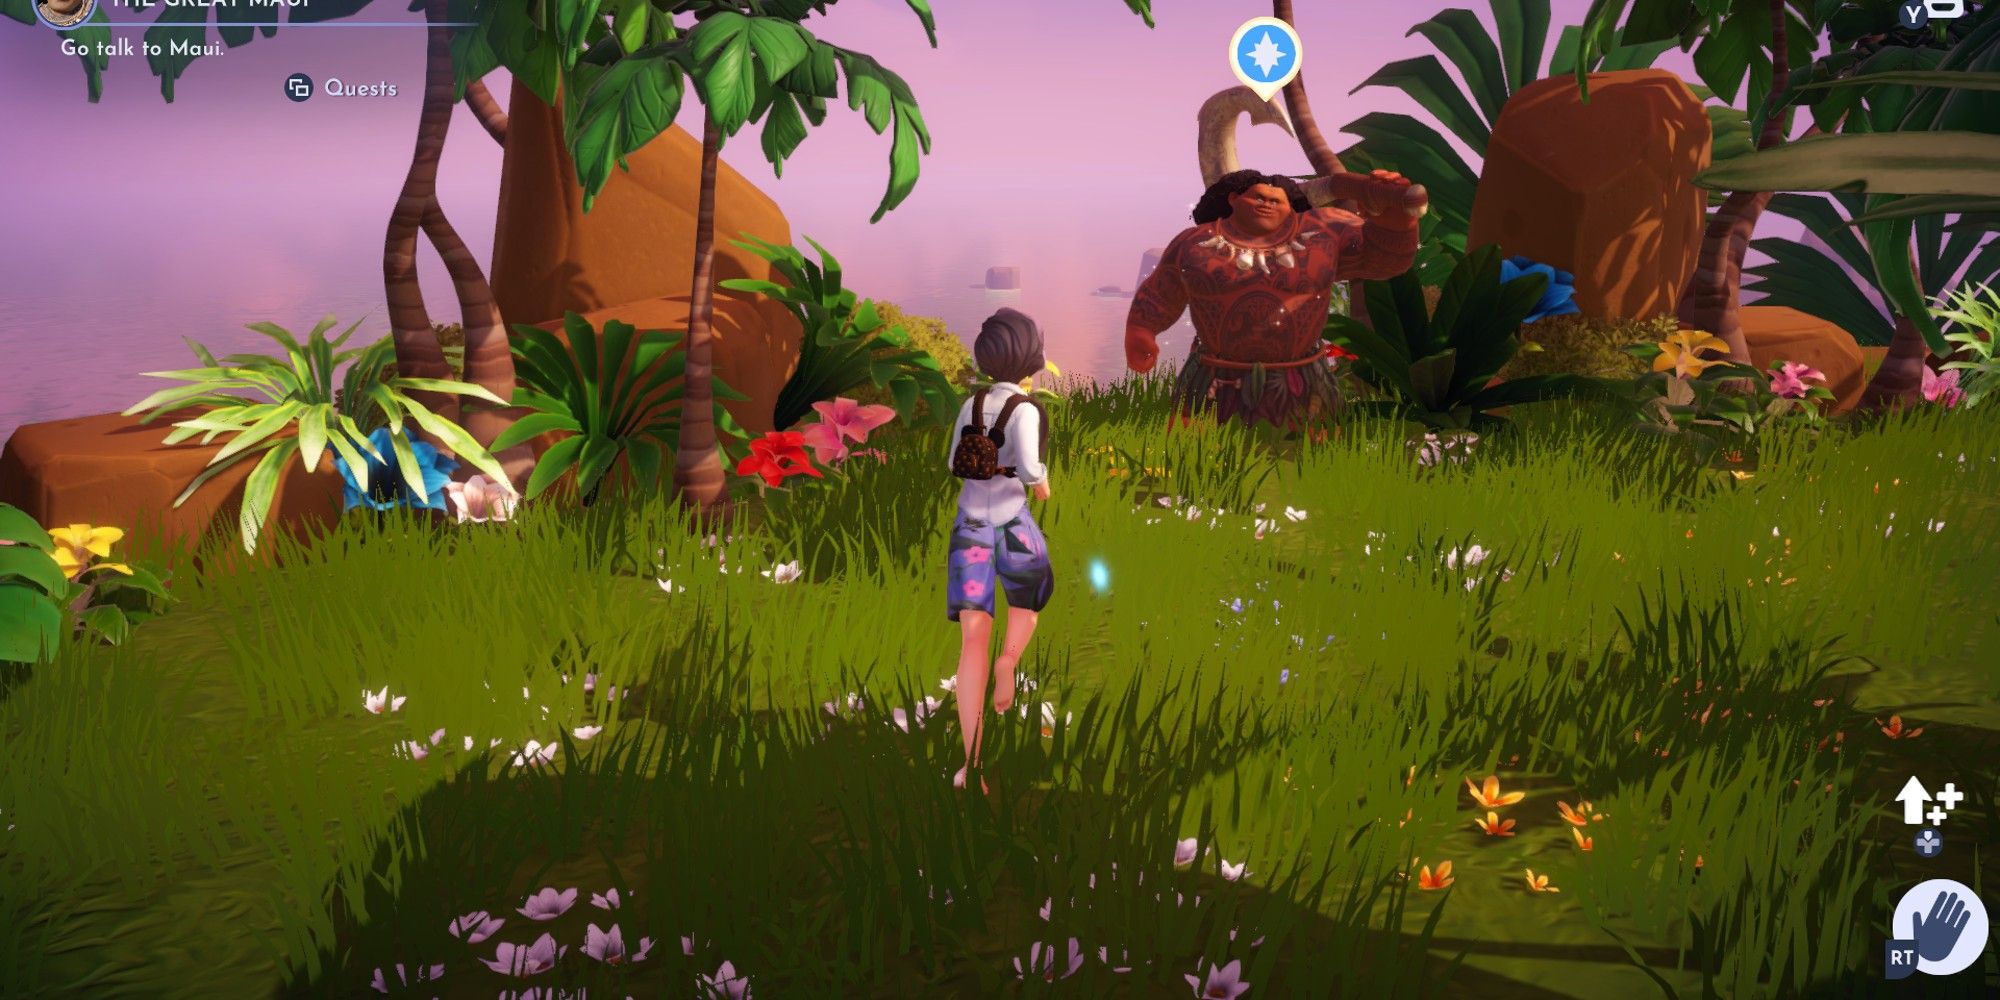 The protagonist greeting Maui in his biome in Dreamlight Valley